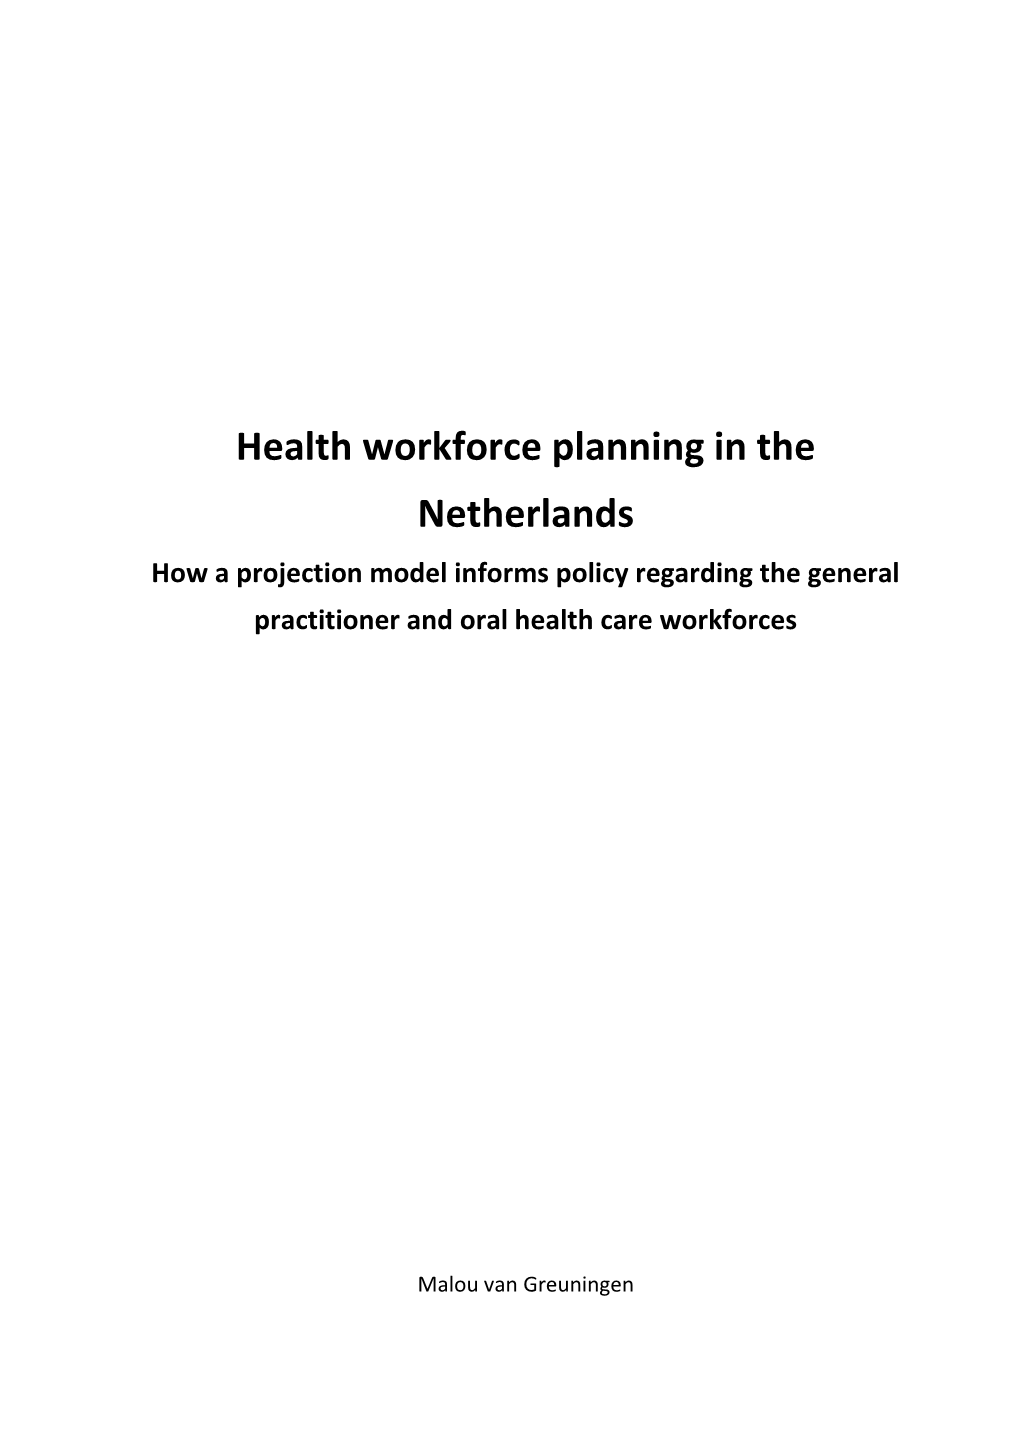 Health Workforce Planning in the Netherlands How a Projection Model Informs Policy Regarding the General Practitioner and Oral Health Care Workforces